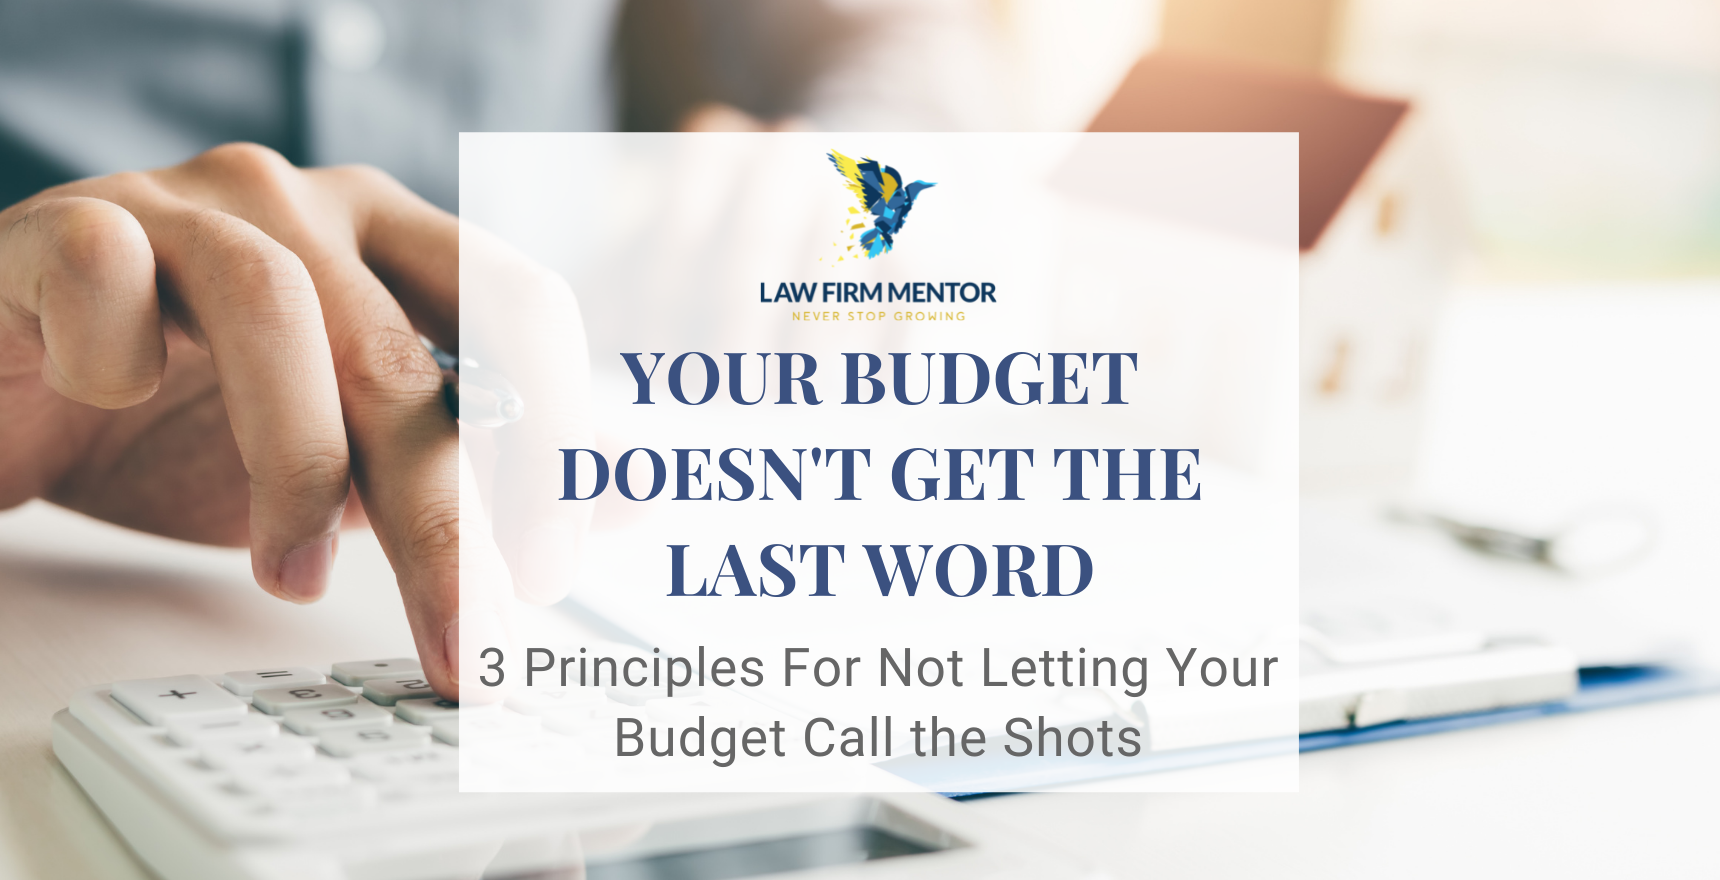 Your Budget Doesn’t Get The Last Word